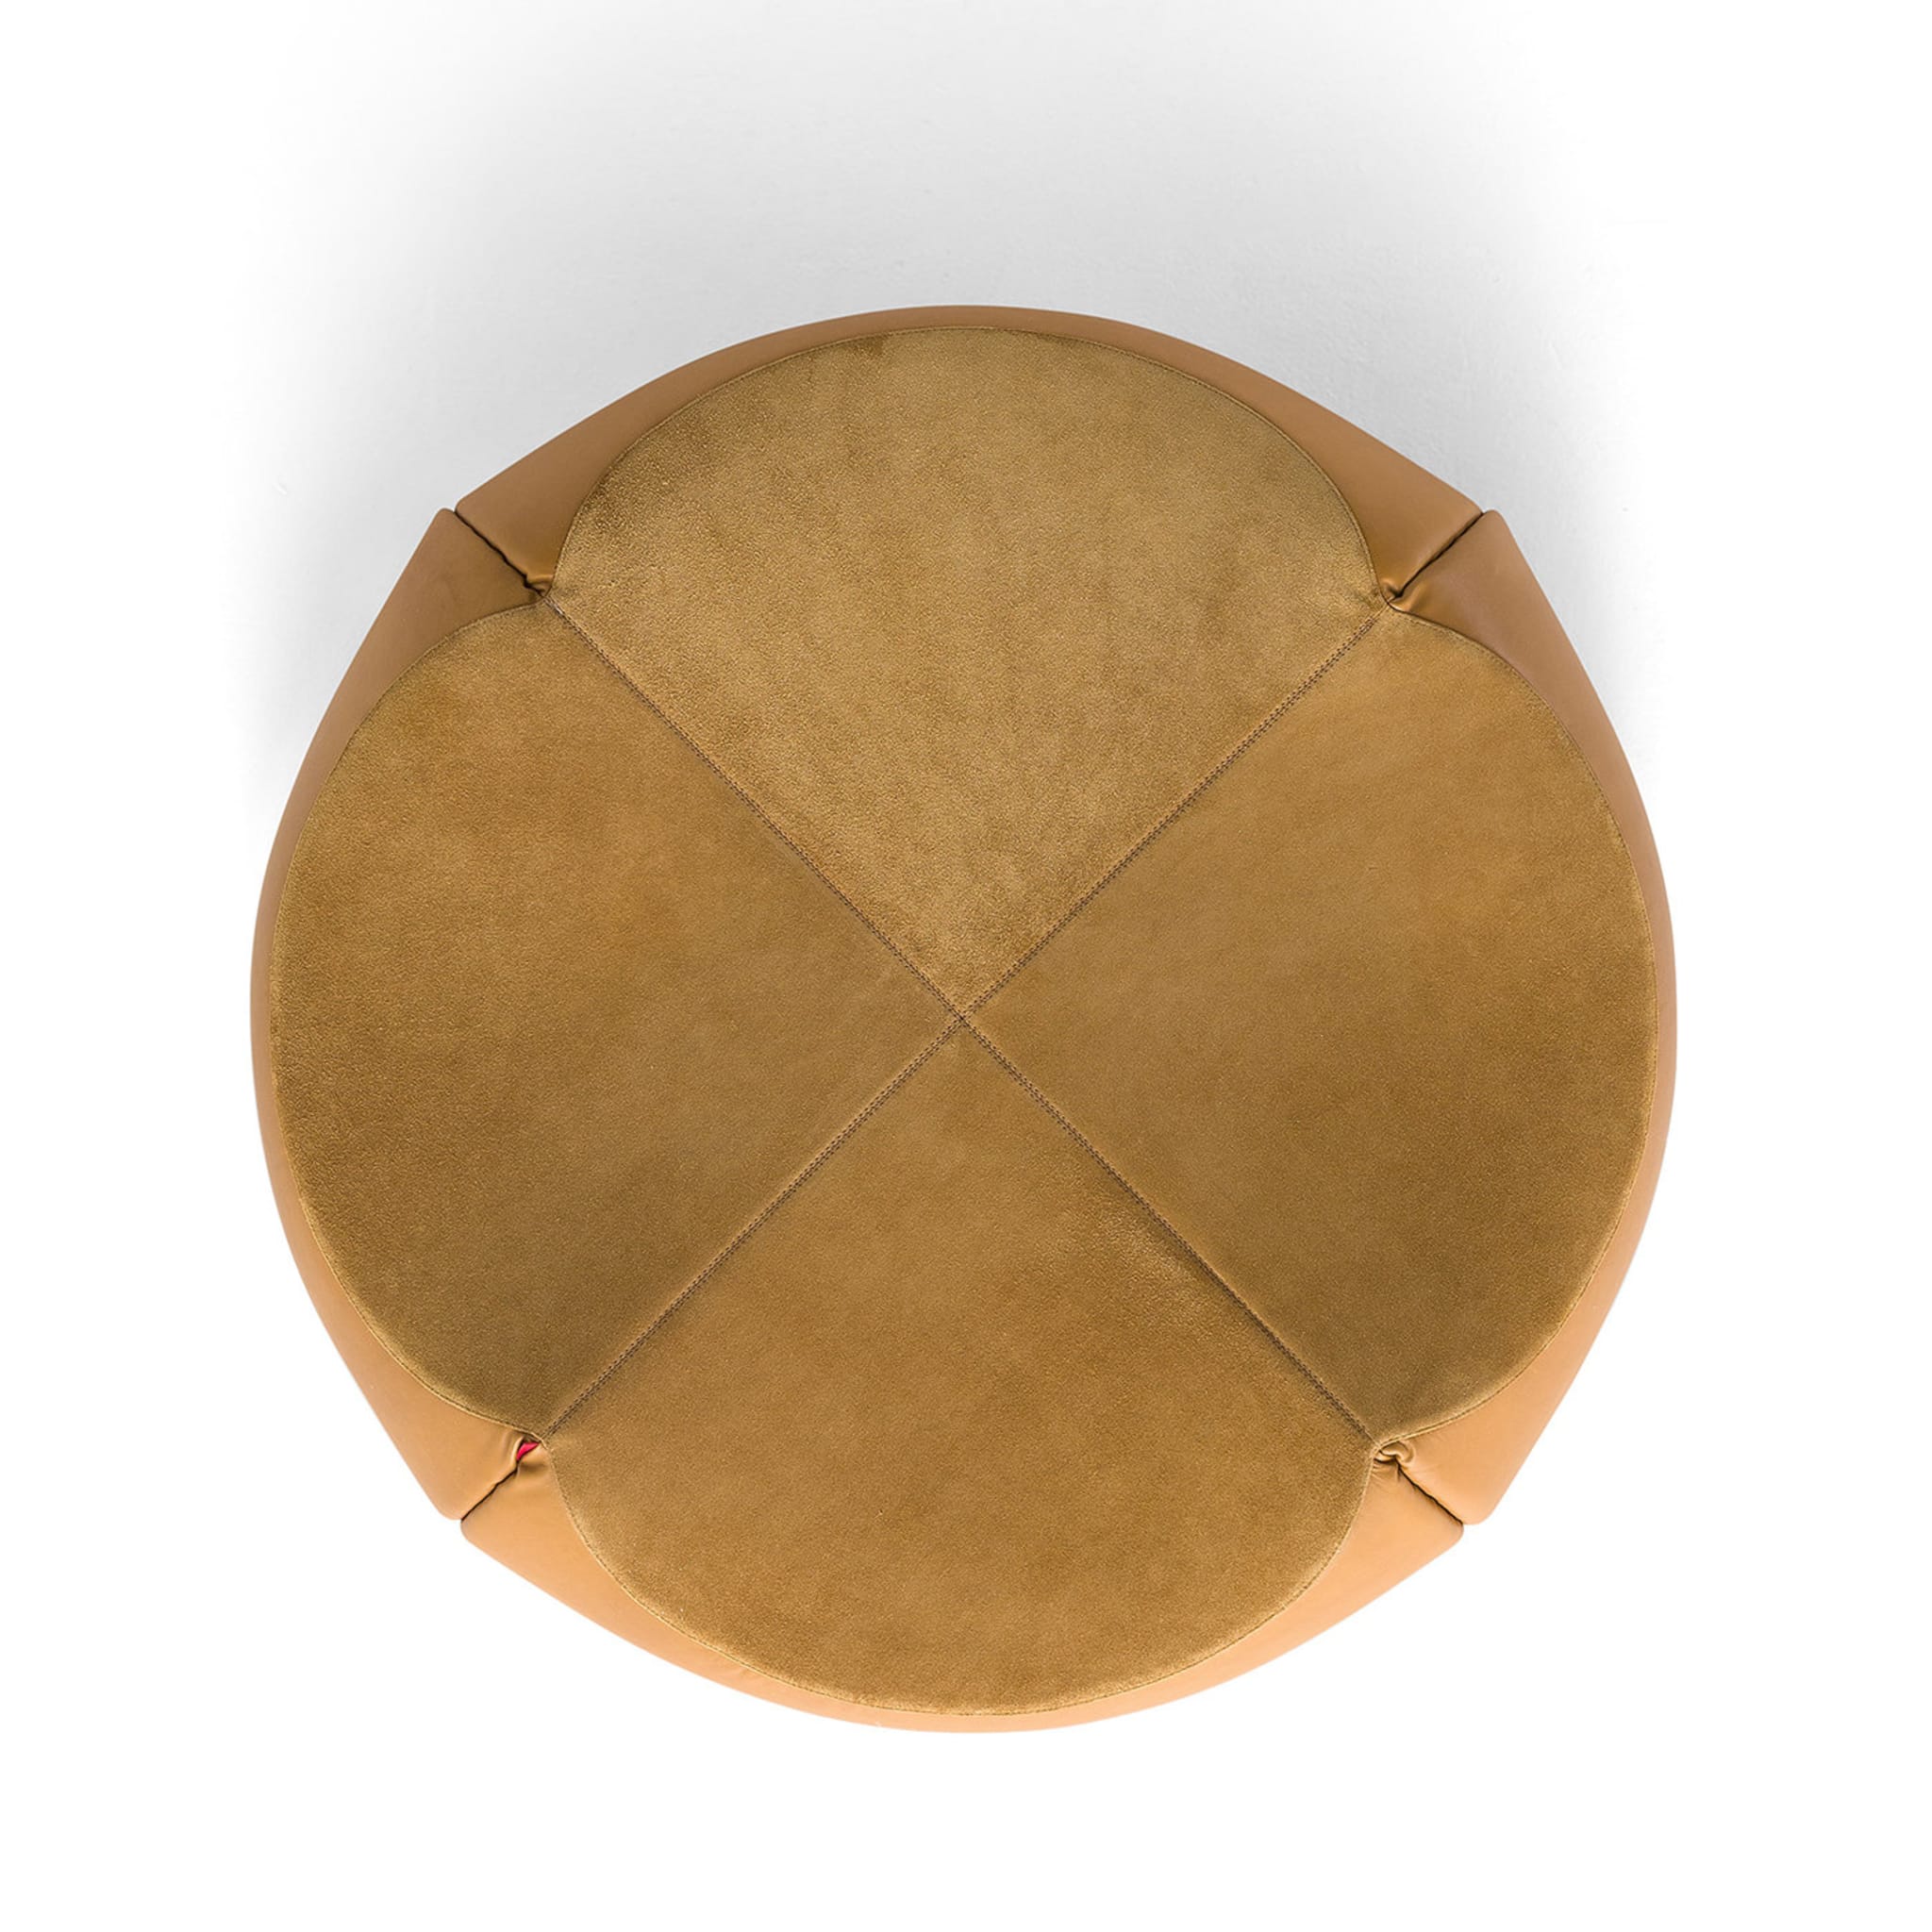 Panis Large Pouf by Anton Cristell and Emanuel Gargano - Alternative view 3